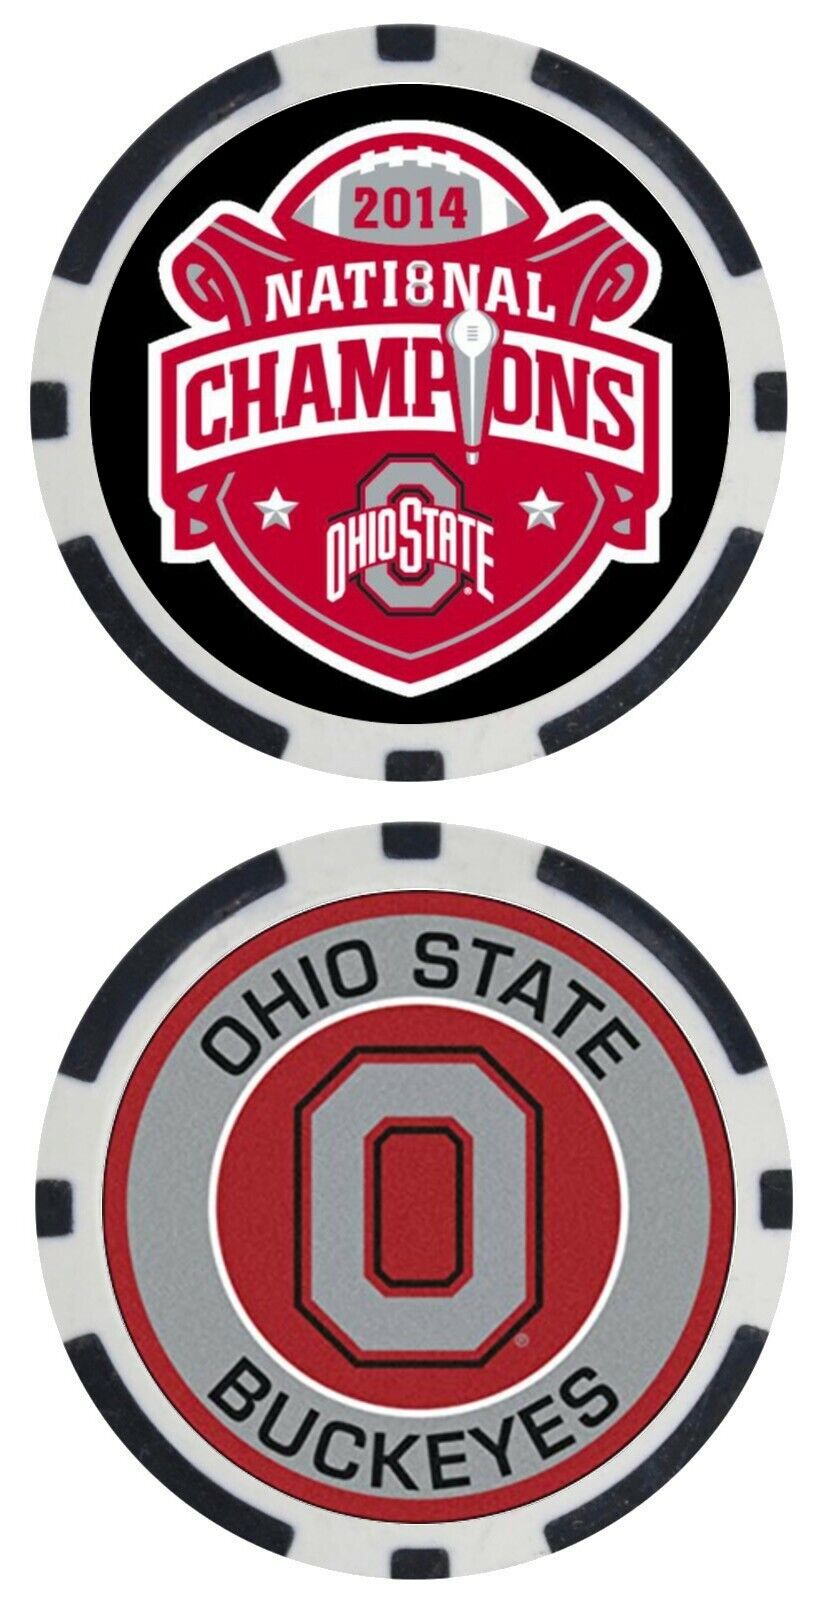 2014 NATIONAL CHAMPIONSHIP - OHIO STATE BUCKEYES - COLLECTORS ITEM - POKER CHIP